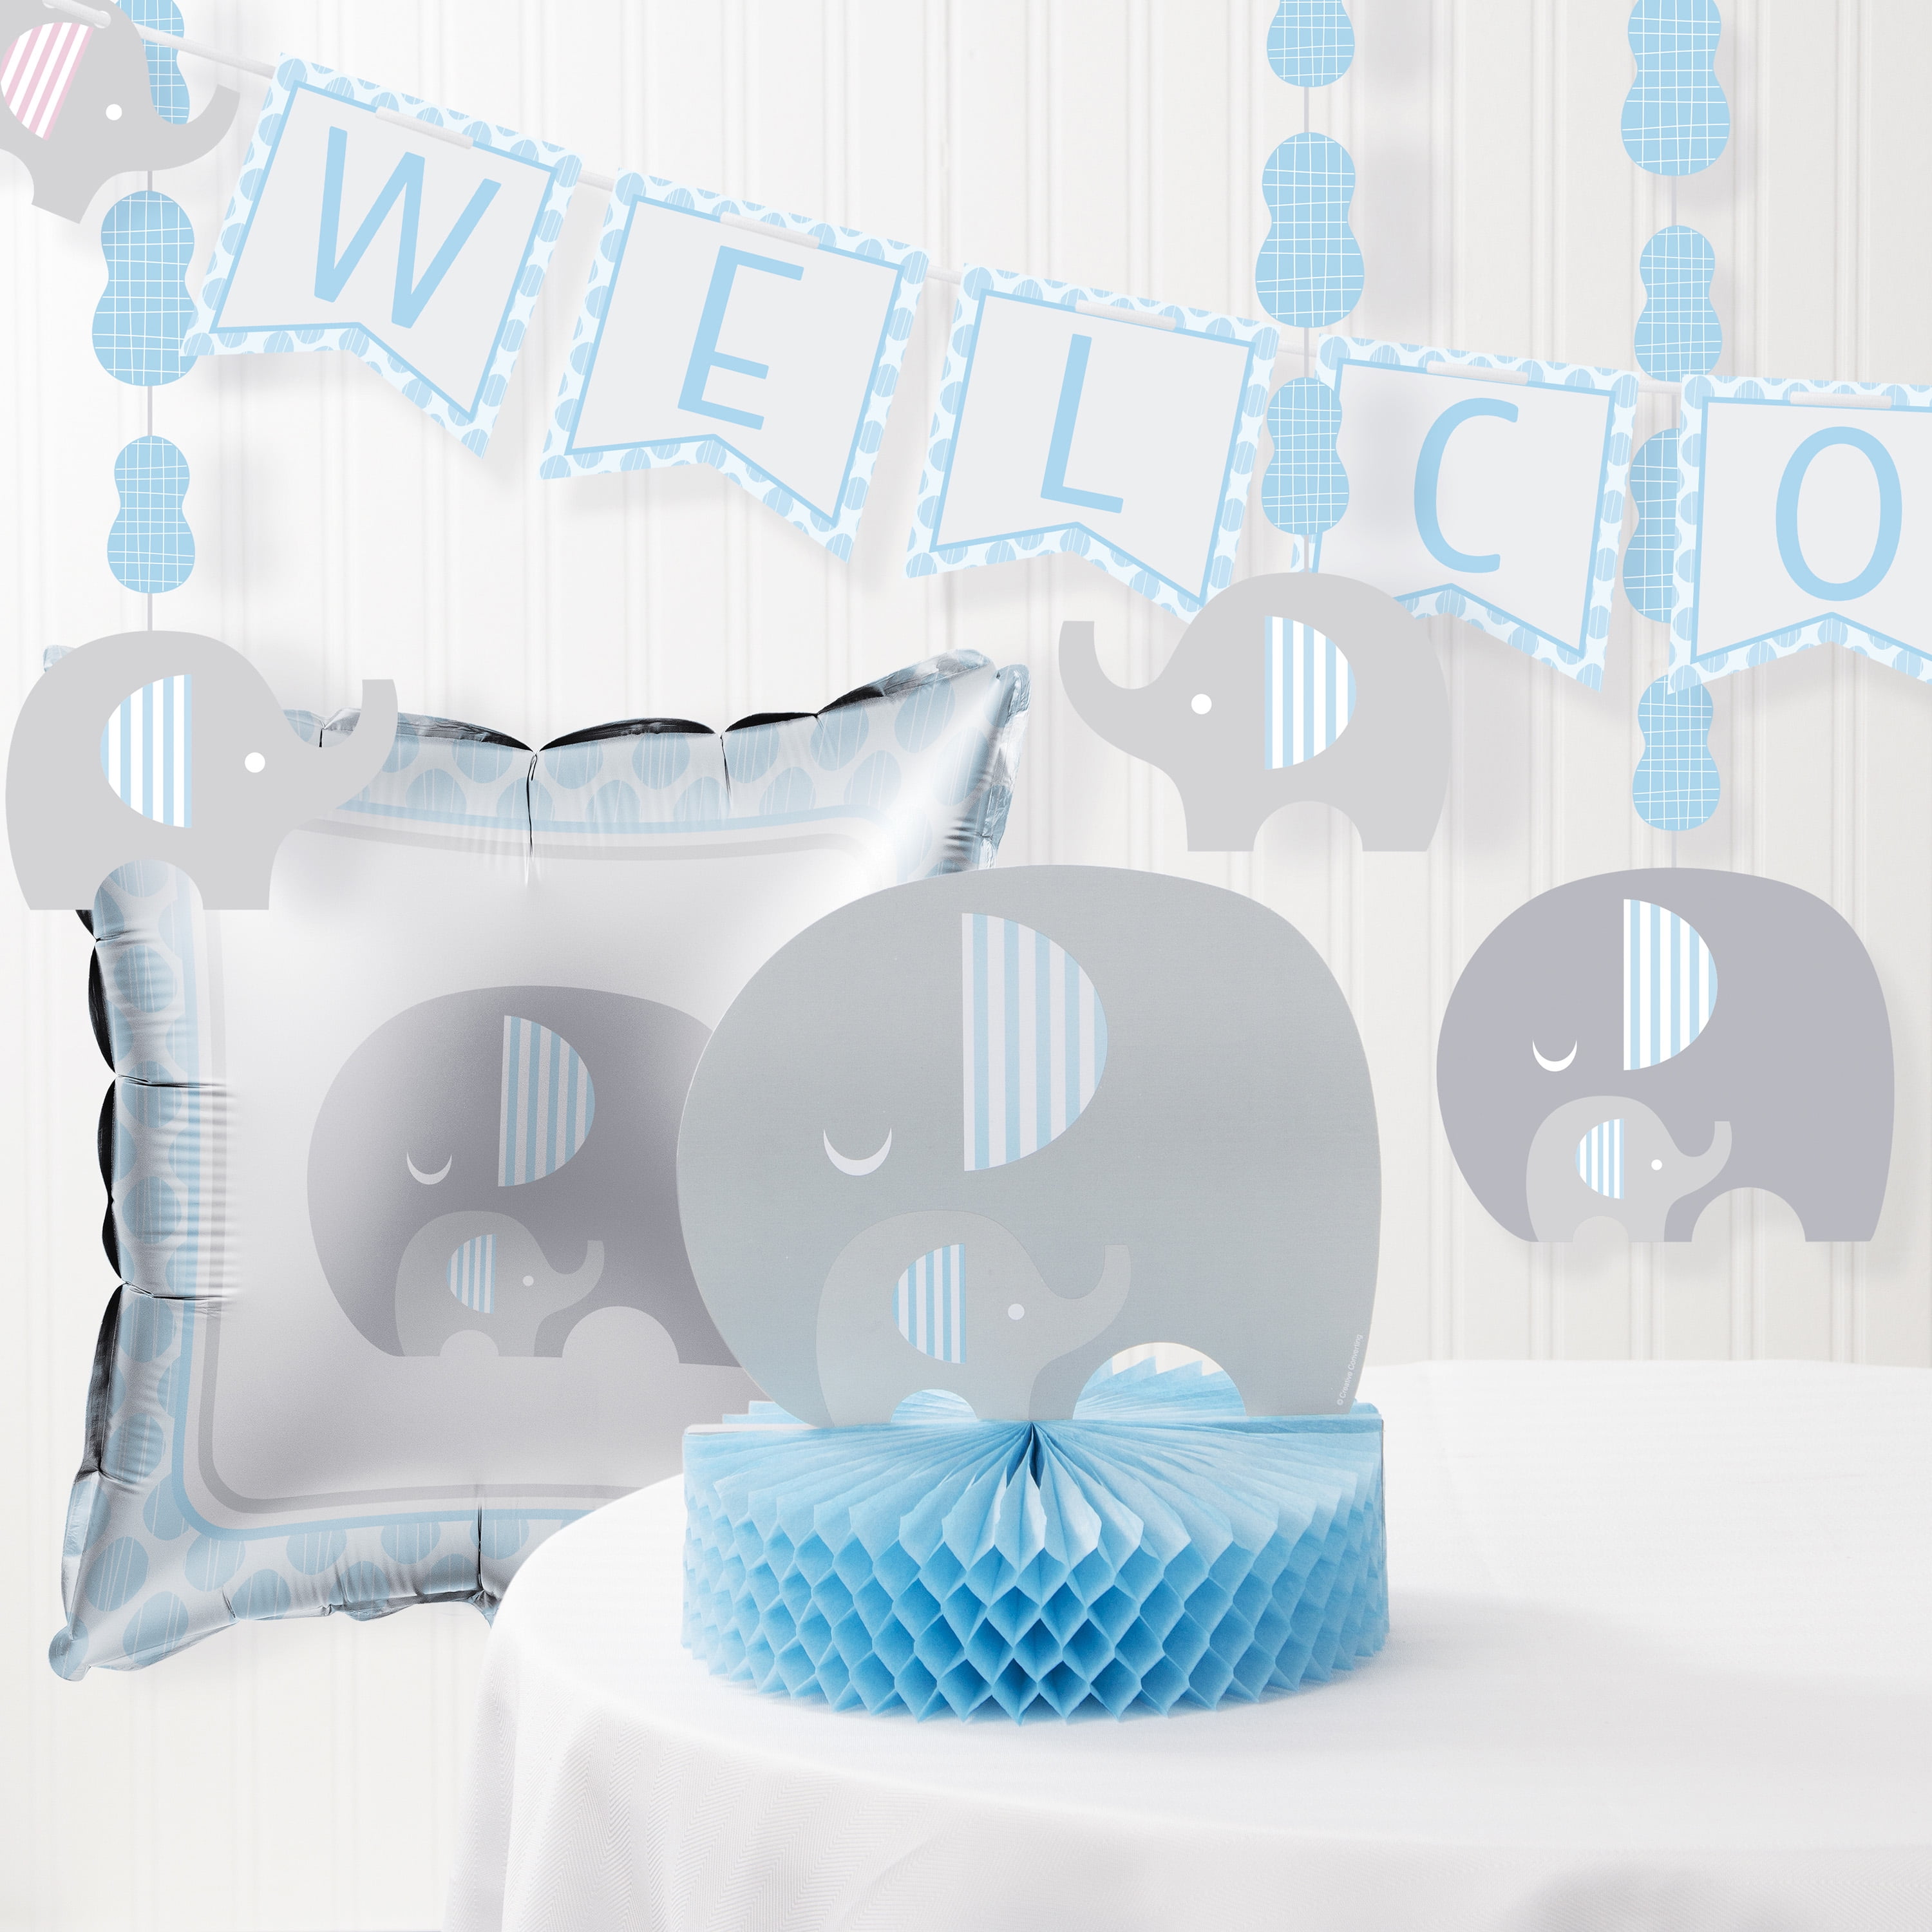 Kreatwow Blue Elephant Baby Shower Welcome Baby Banner for Boys Baby Shower Little Peanut Nursery Decorations 